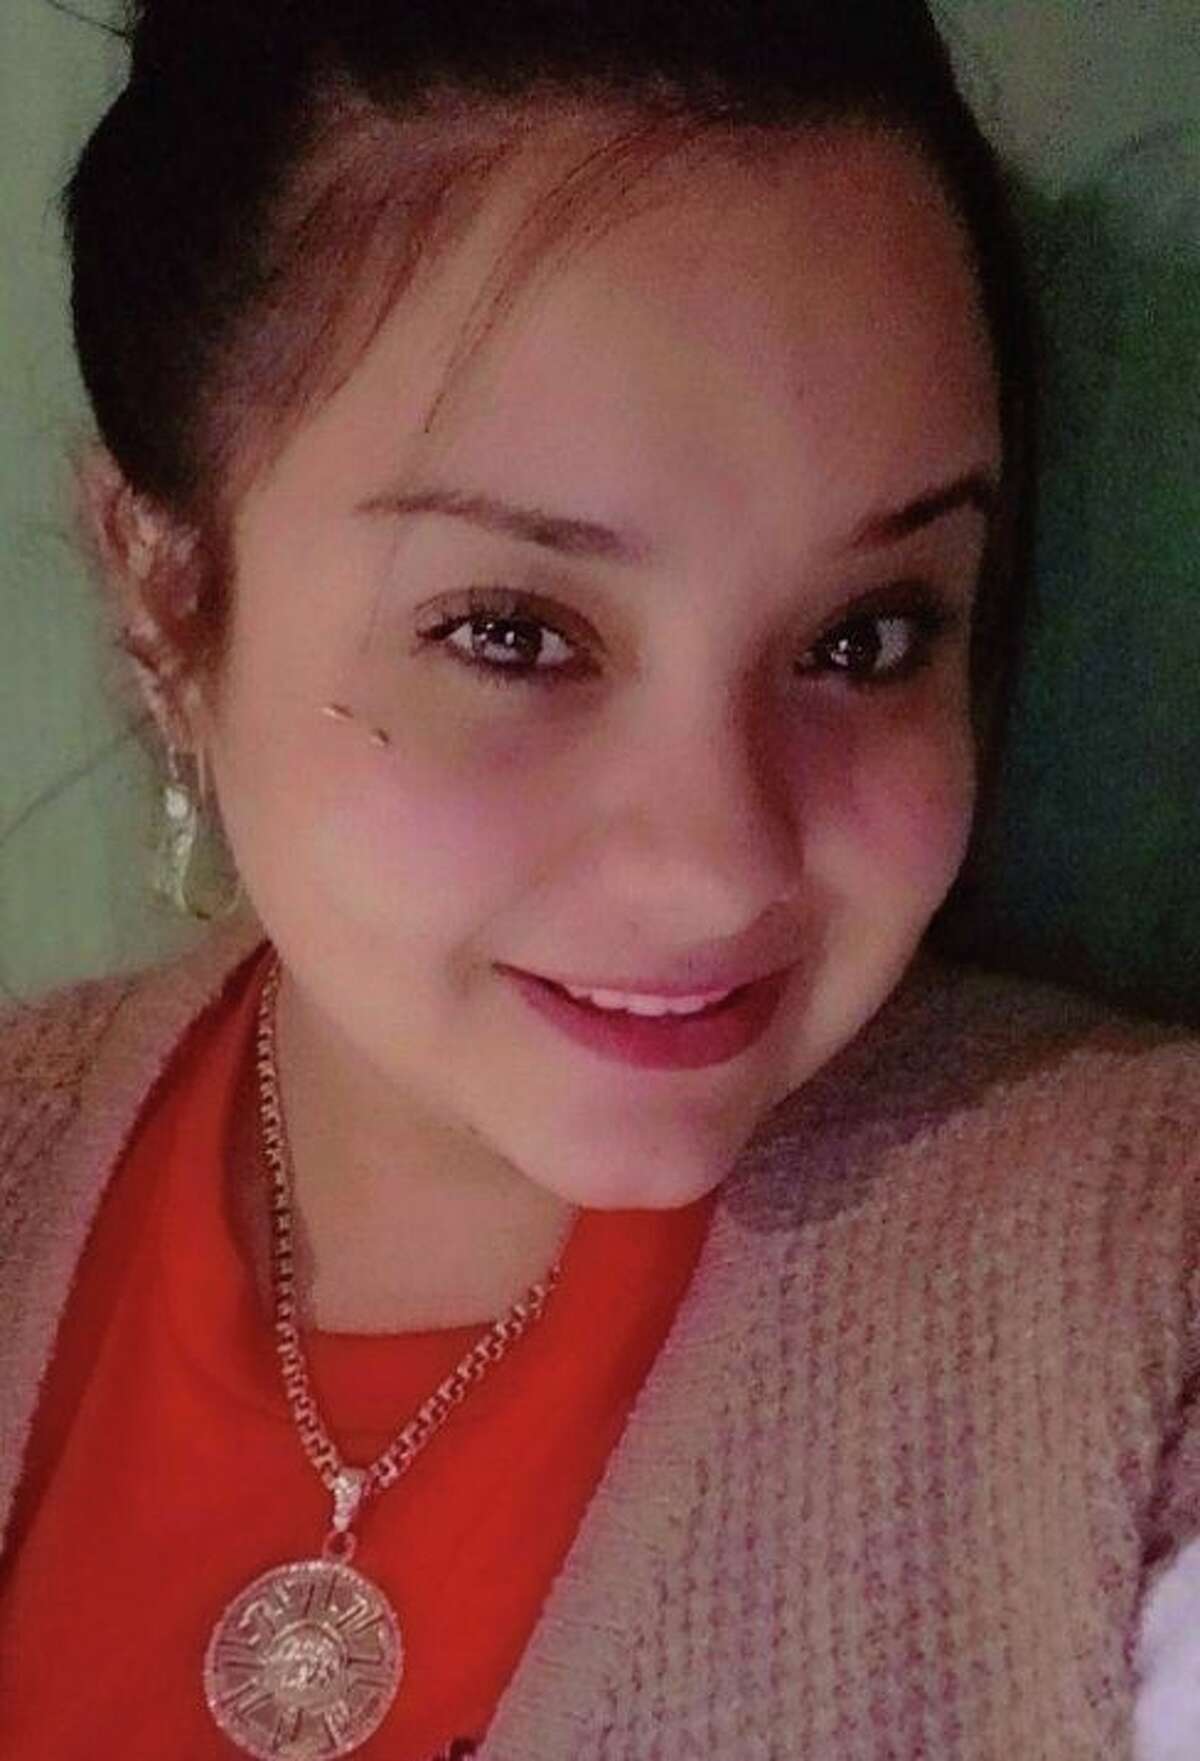 Krystal Claudina Limon was pronounced dead on Saturday, Jan. 14, 2023 by the Laredo Police Department. She died Monday, Jan. 9, 2023 after allegedly being shot in the face by her husband two days prior.